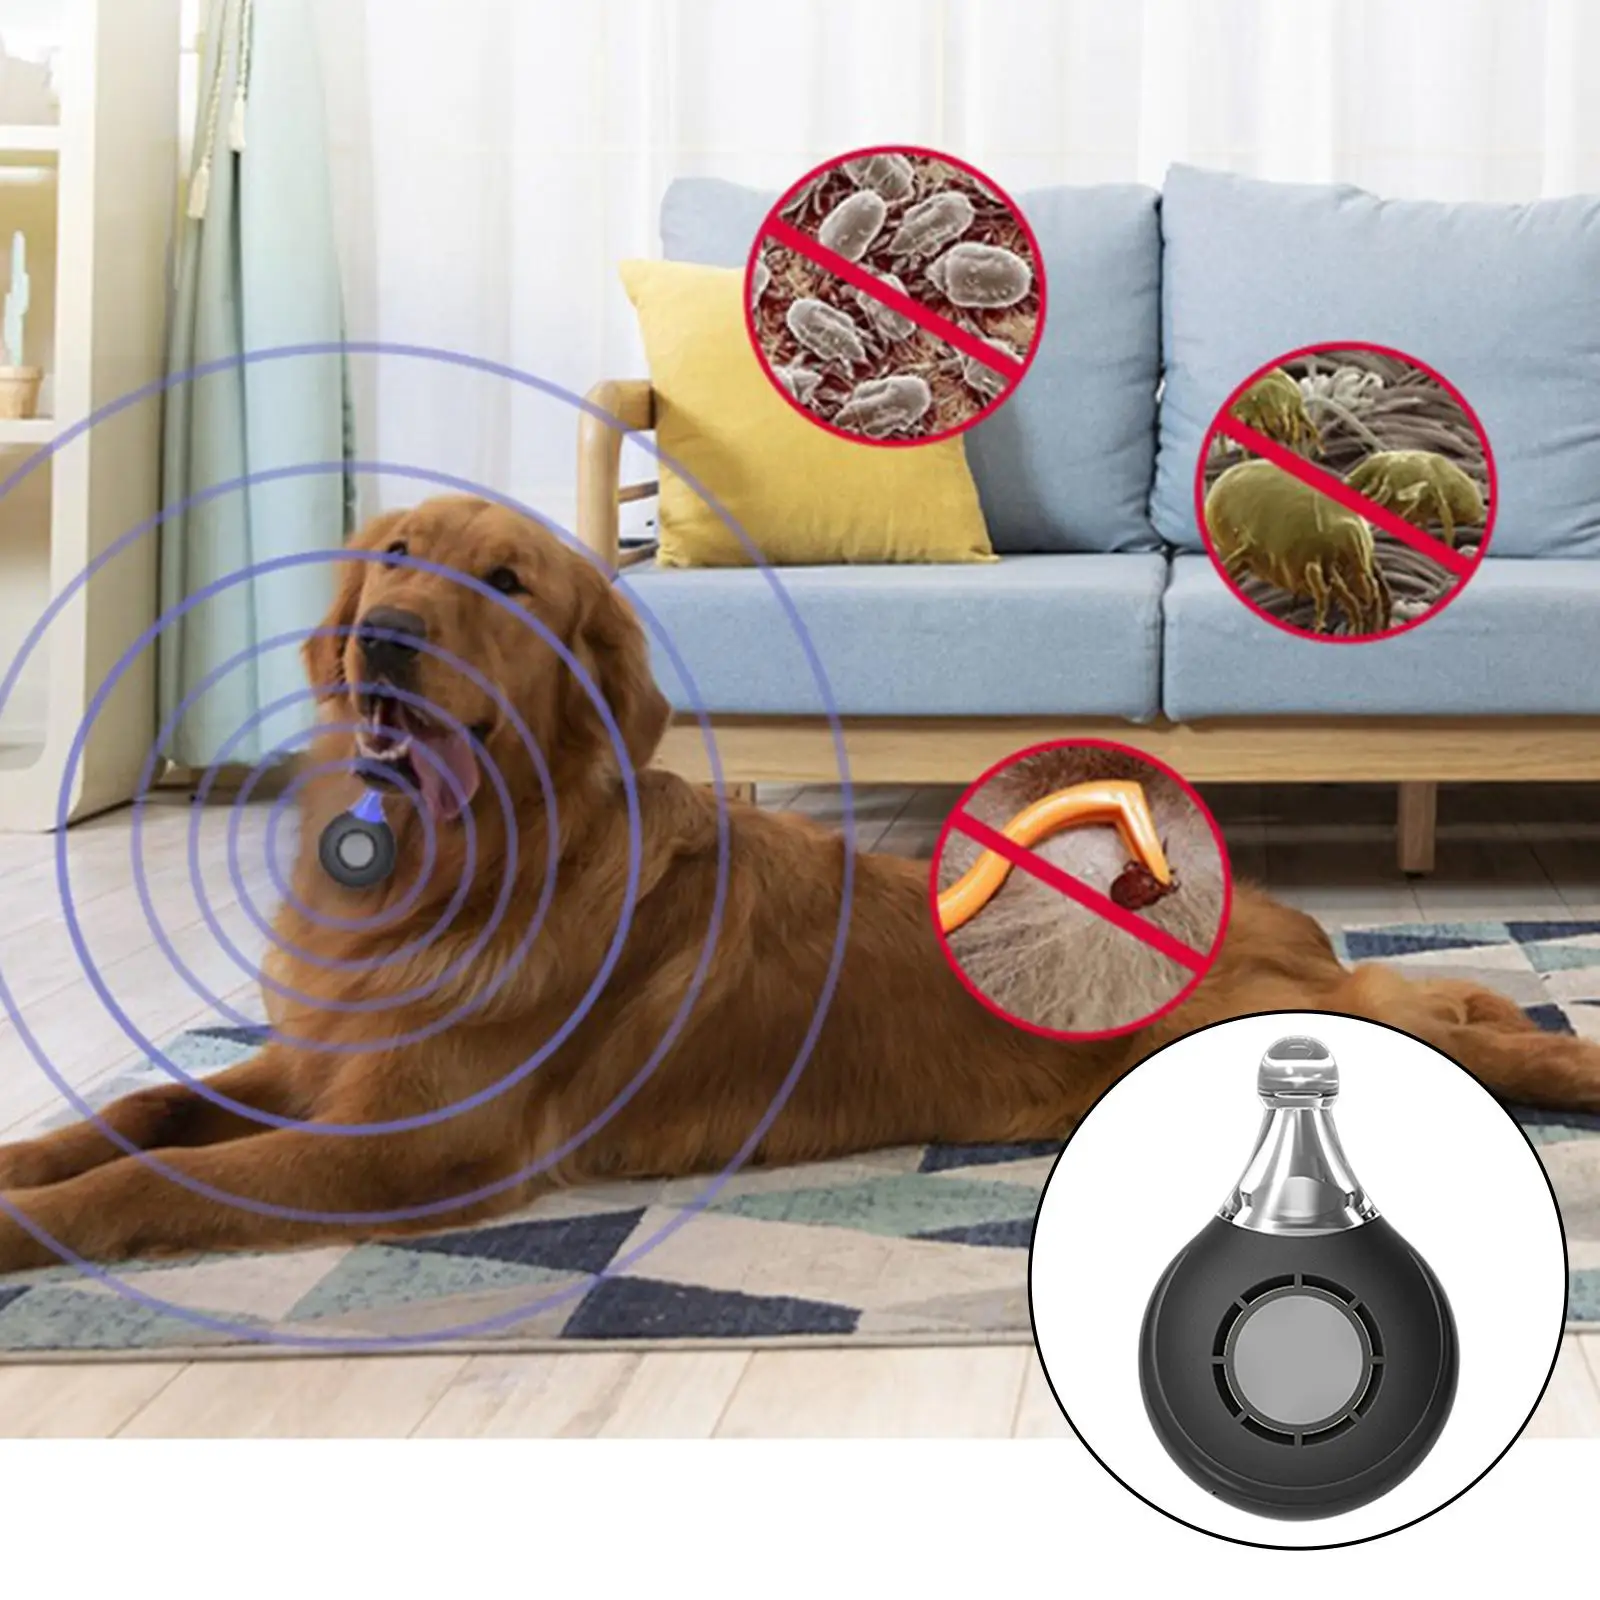 Ultrasonic Pest Repeller Compact Cat Insect Ticks Repellent Safe Pendant